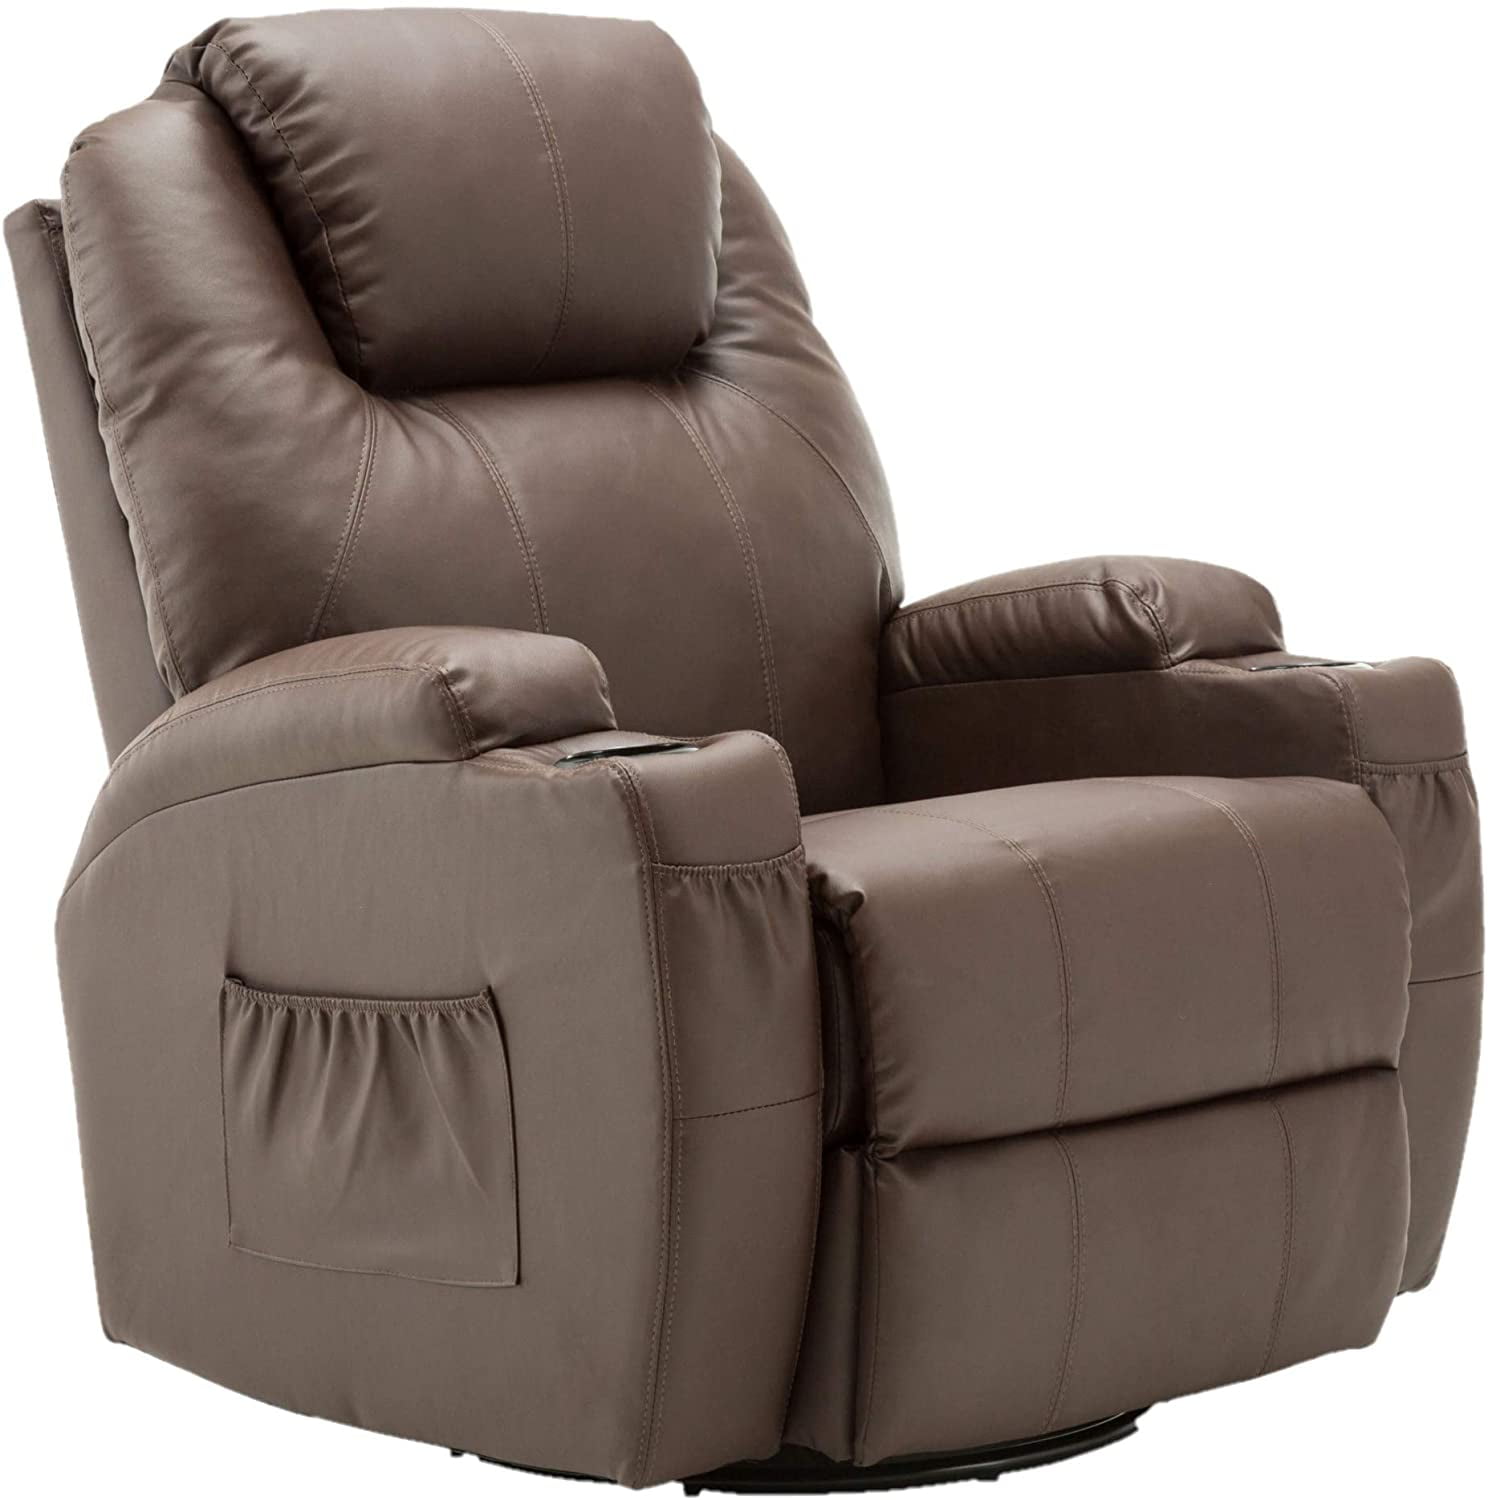 Mcombo Faux Leather Recliner Brown, Leather Recliner Swivel Chair